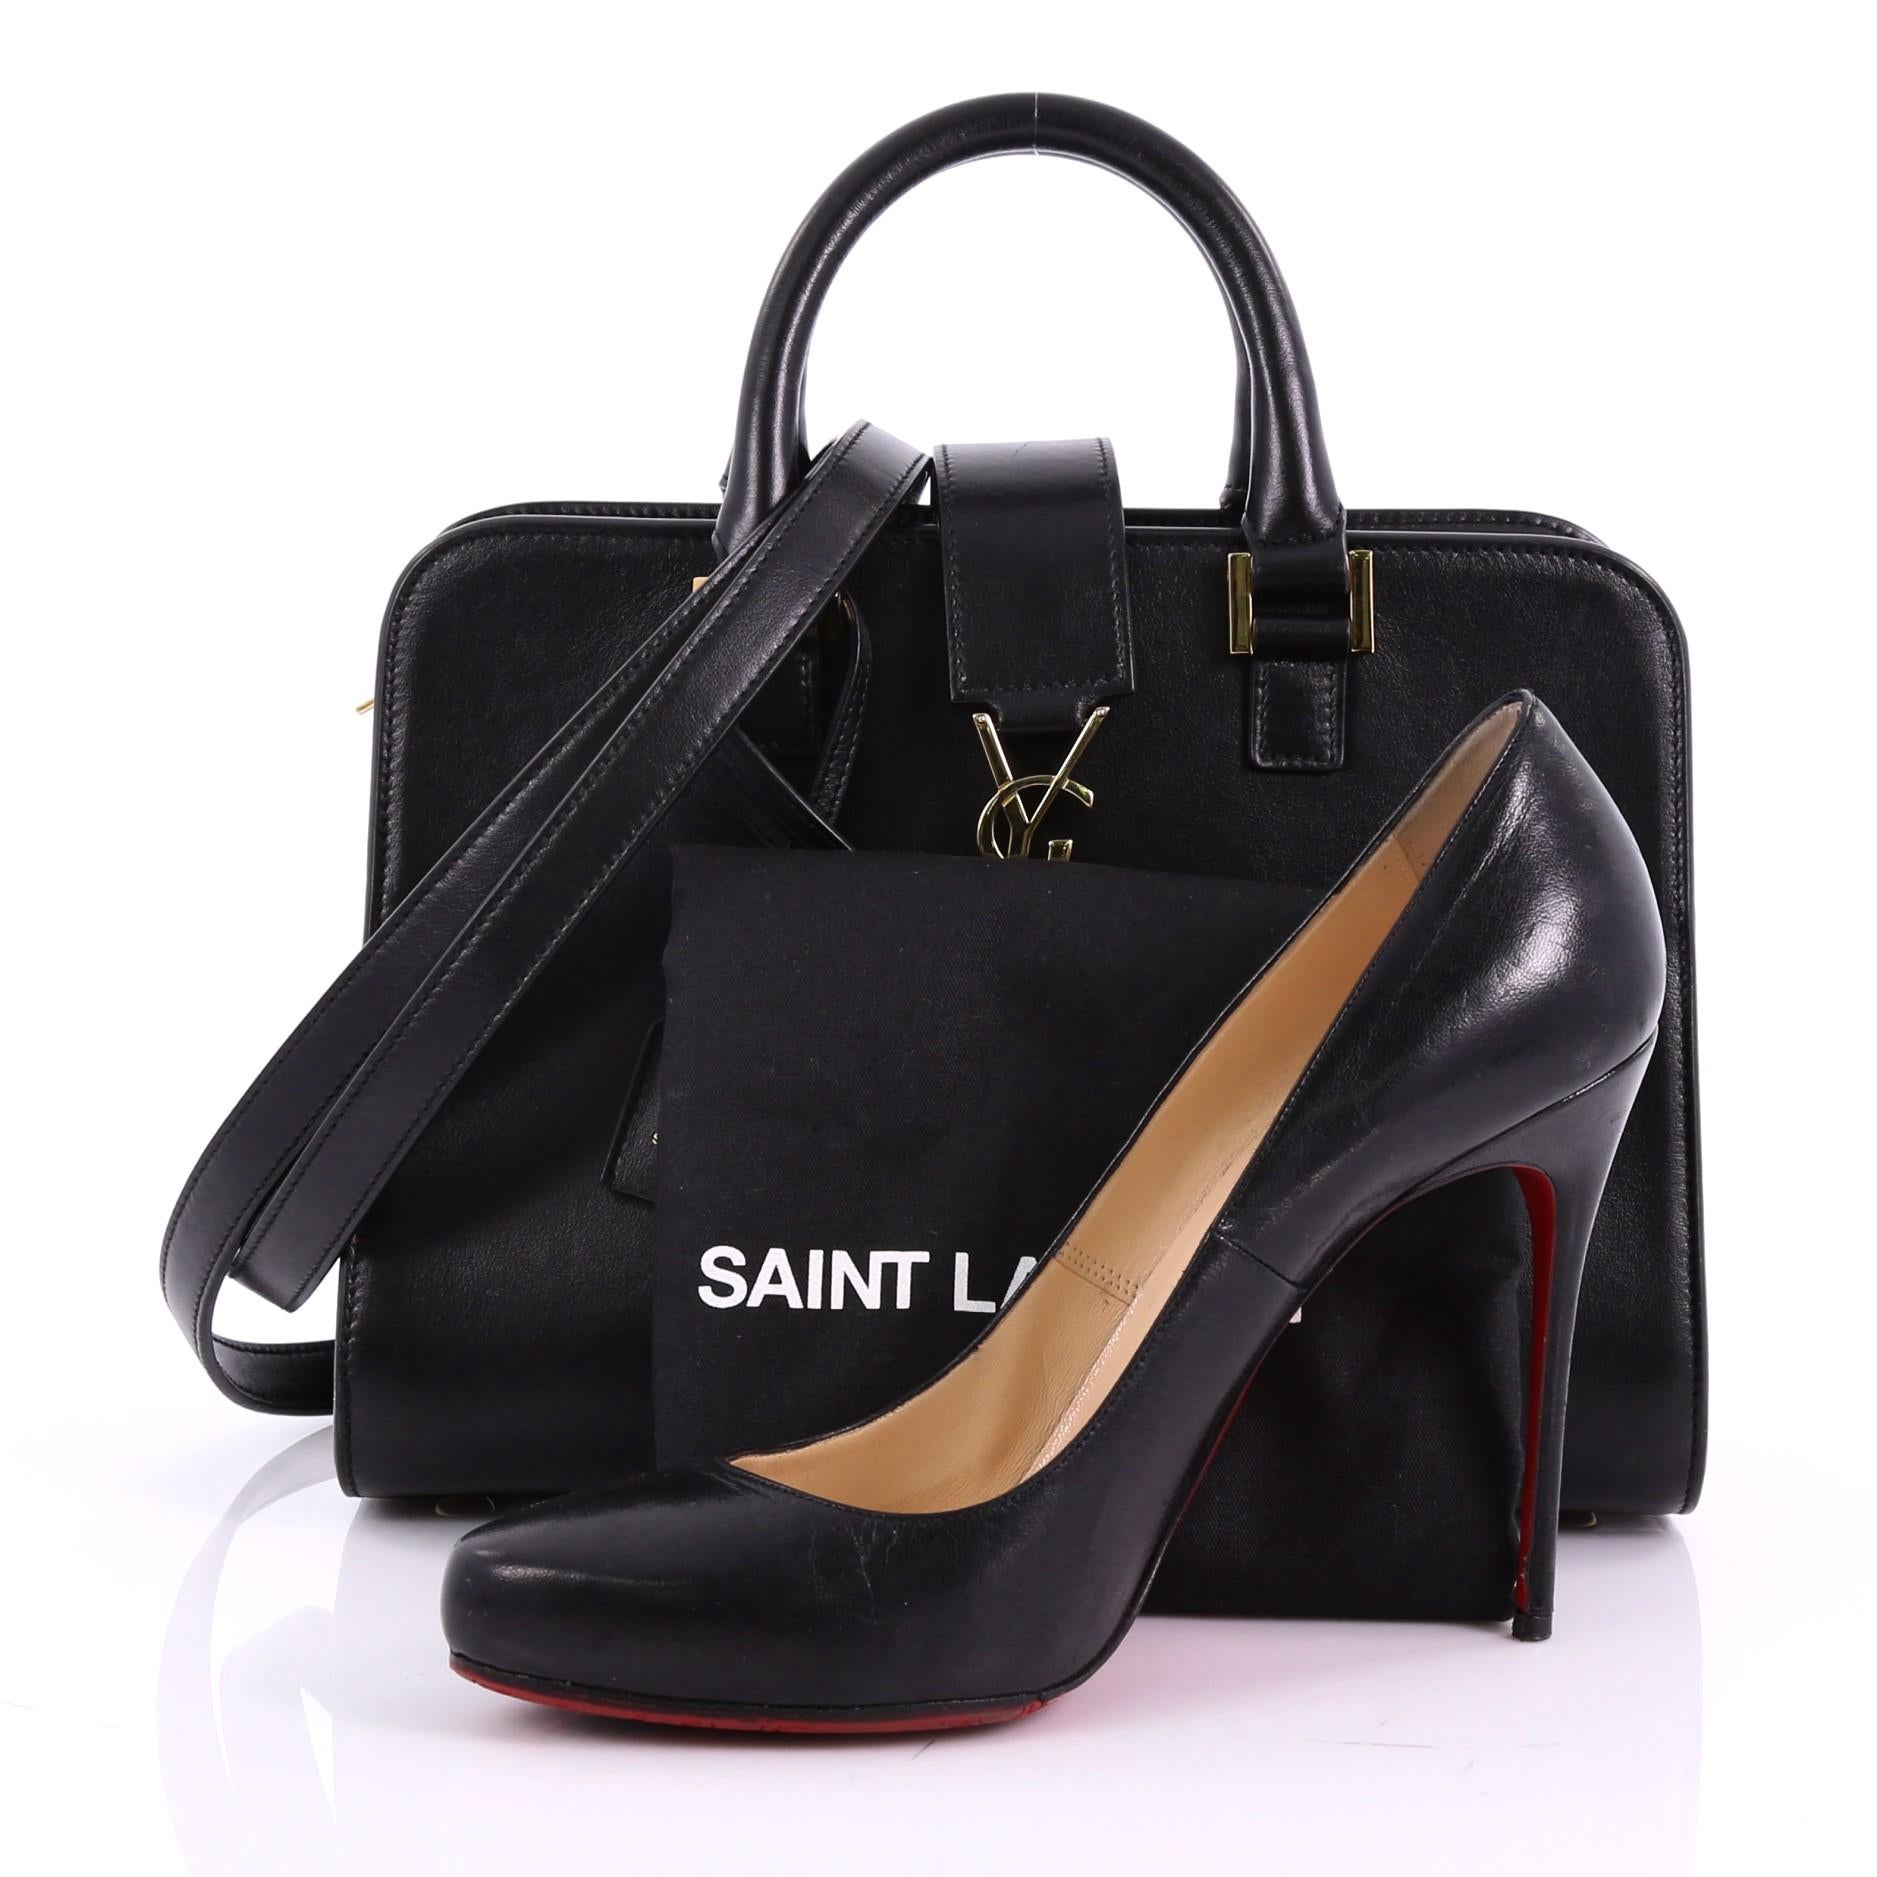 This Saint Laurent Monogram Cabas Downtown Leather Baby, crafted from black leather, features dual rolled handles, YSL metal logo at the front, protective base studs, and gold-tone hardware. Its magnetic snap and zip closure opens to a black leather